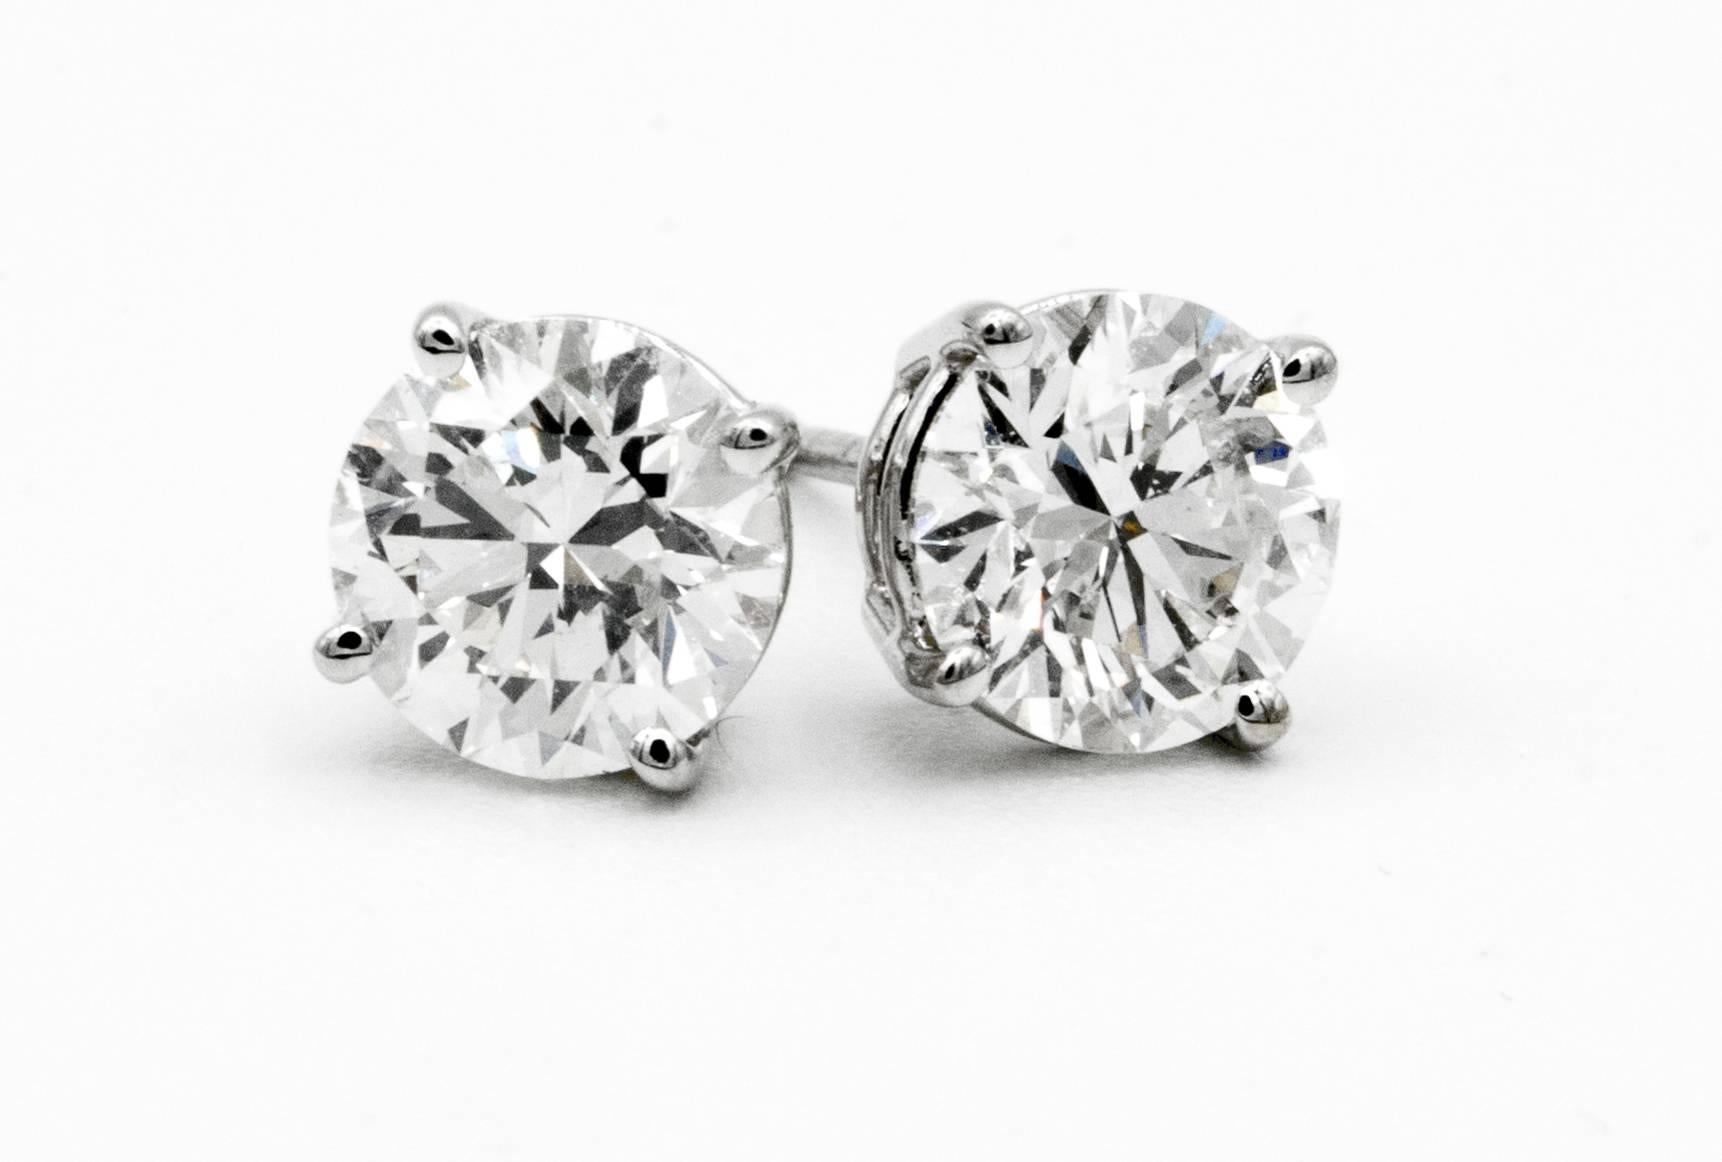 2.02 Carat Diamond Stud earrings in 14K White Gold
A pair of Diamond stud earrings weighing 2.02 Carats total. 
Color is H , Clarity is SI2
6.4 MM Diameter, beautifully cut and perfectly matched pair 
